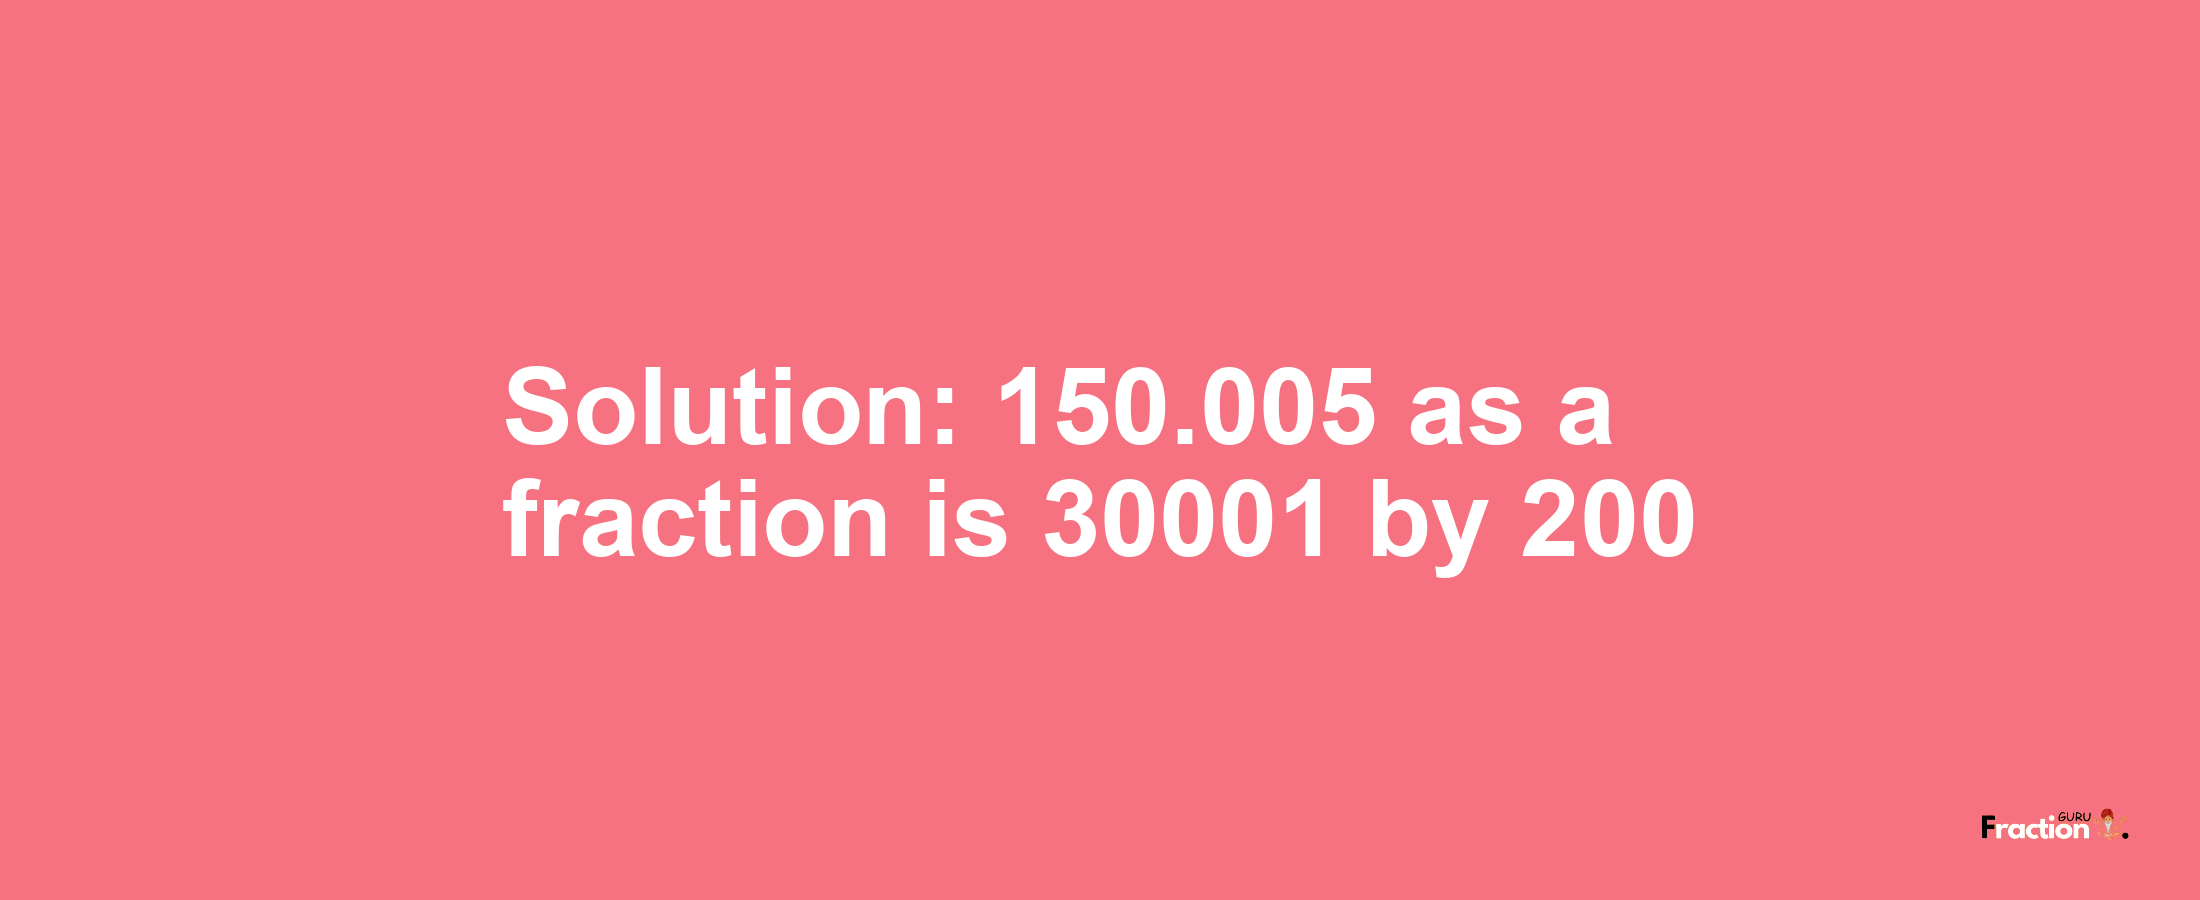 Solution:150.005 as a fraction is 30001/200